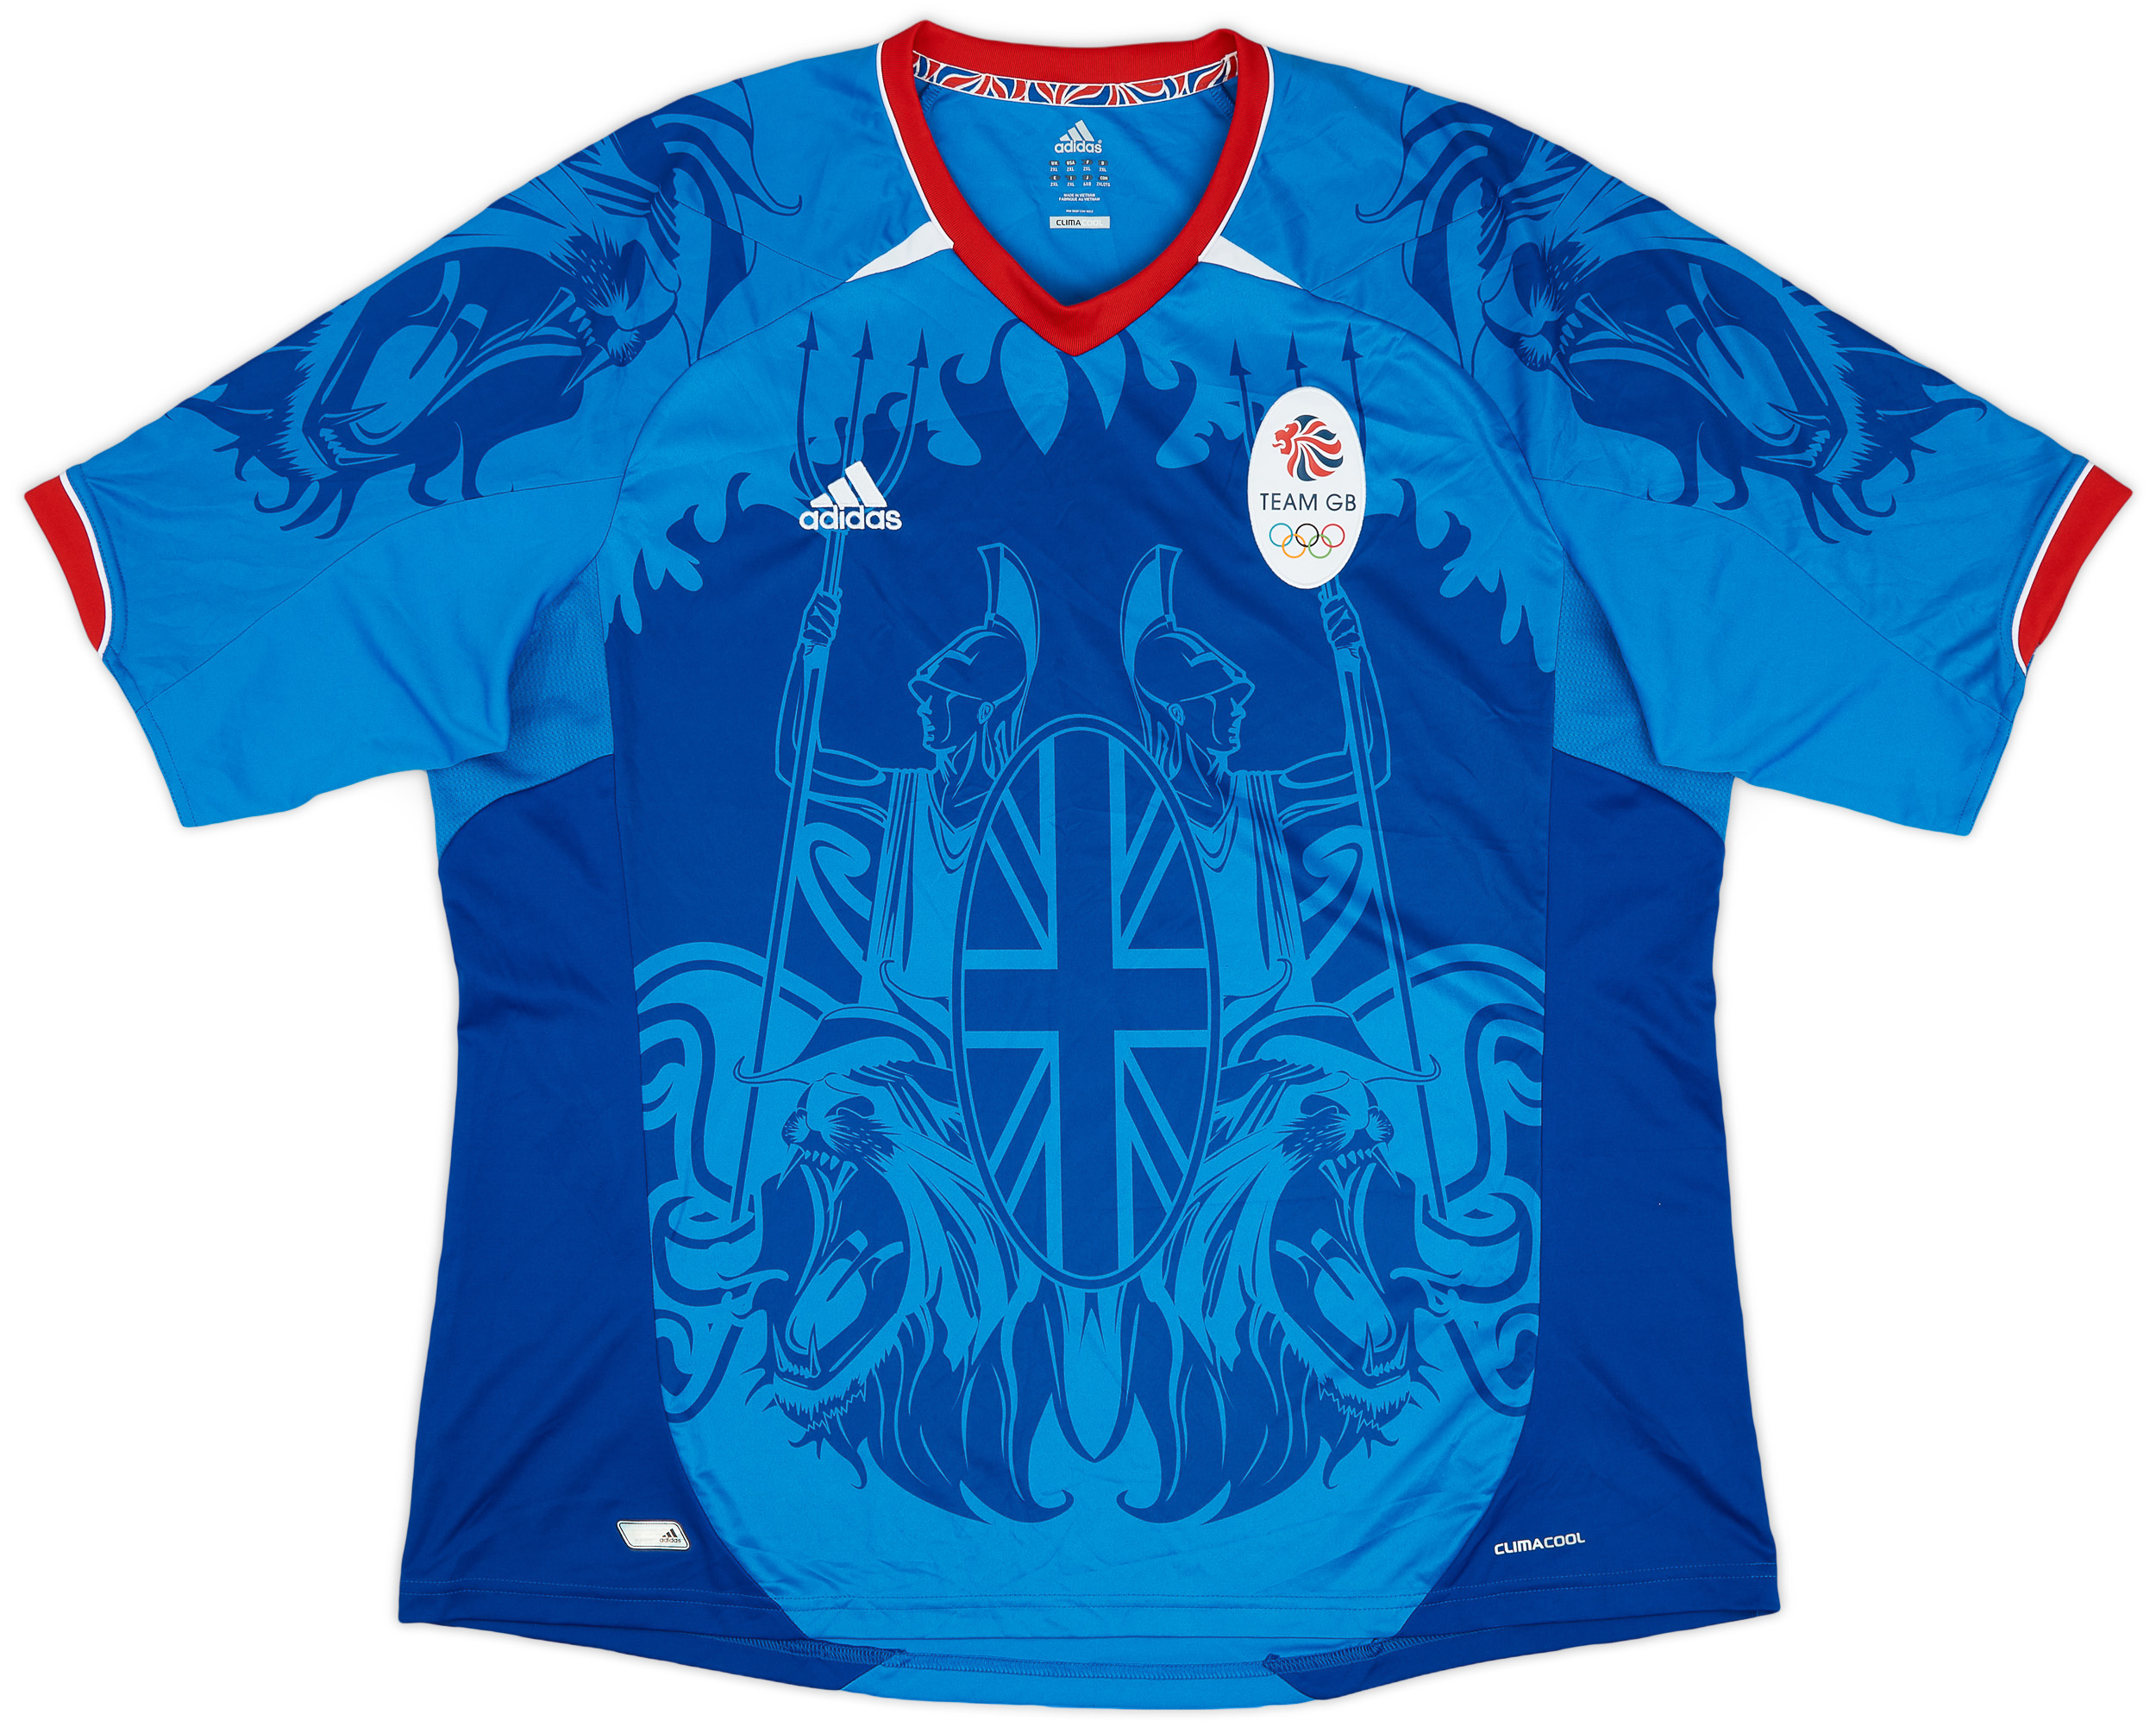 2011 Team GB Olympic 'Limited Edition' Home Shirt - 10/10 - ()